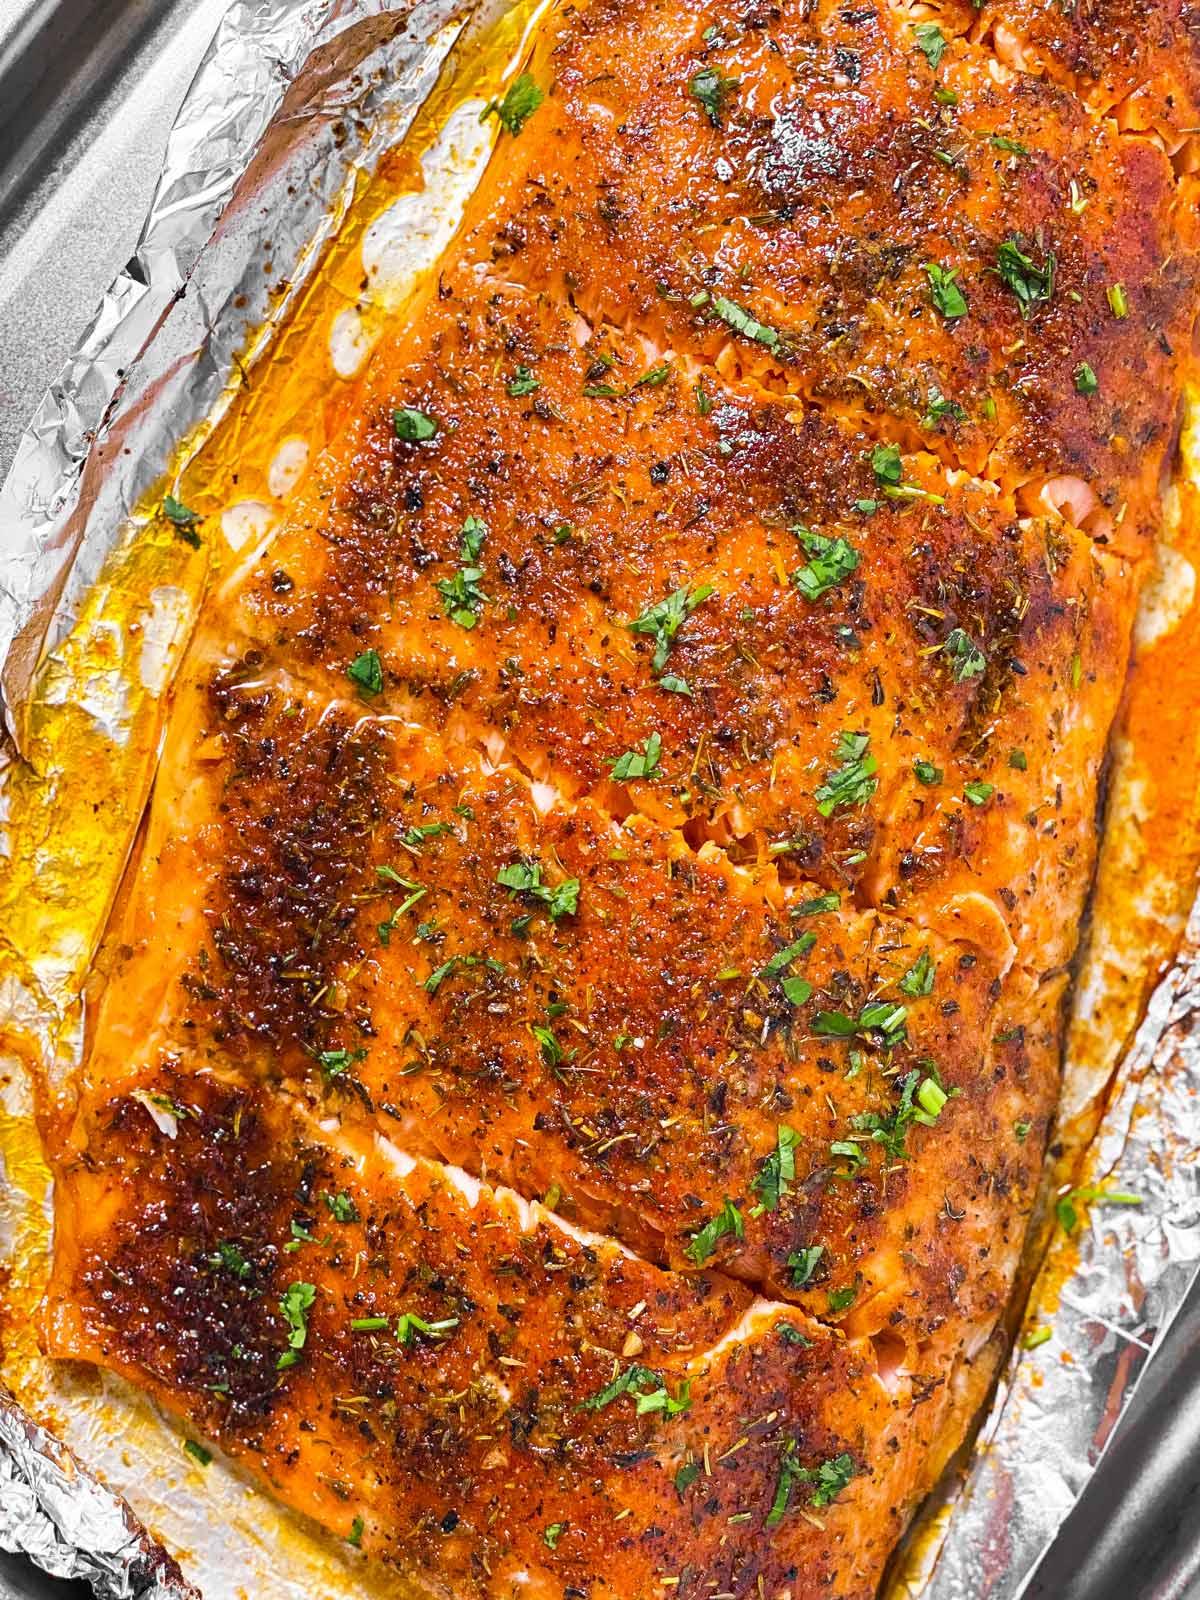 overhead view of oven baked salmon fillet cut into pieces